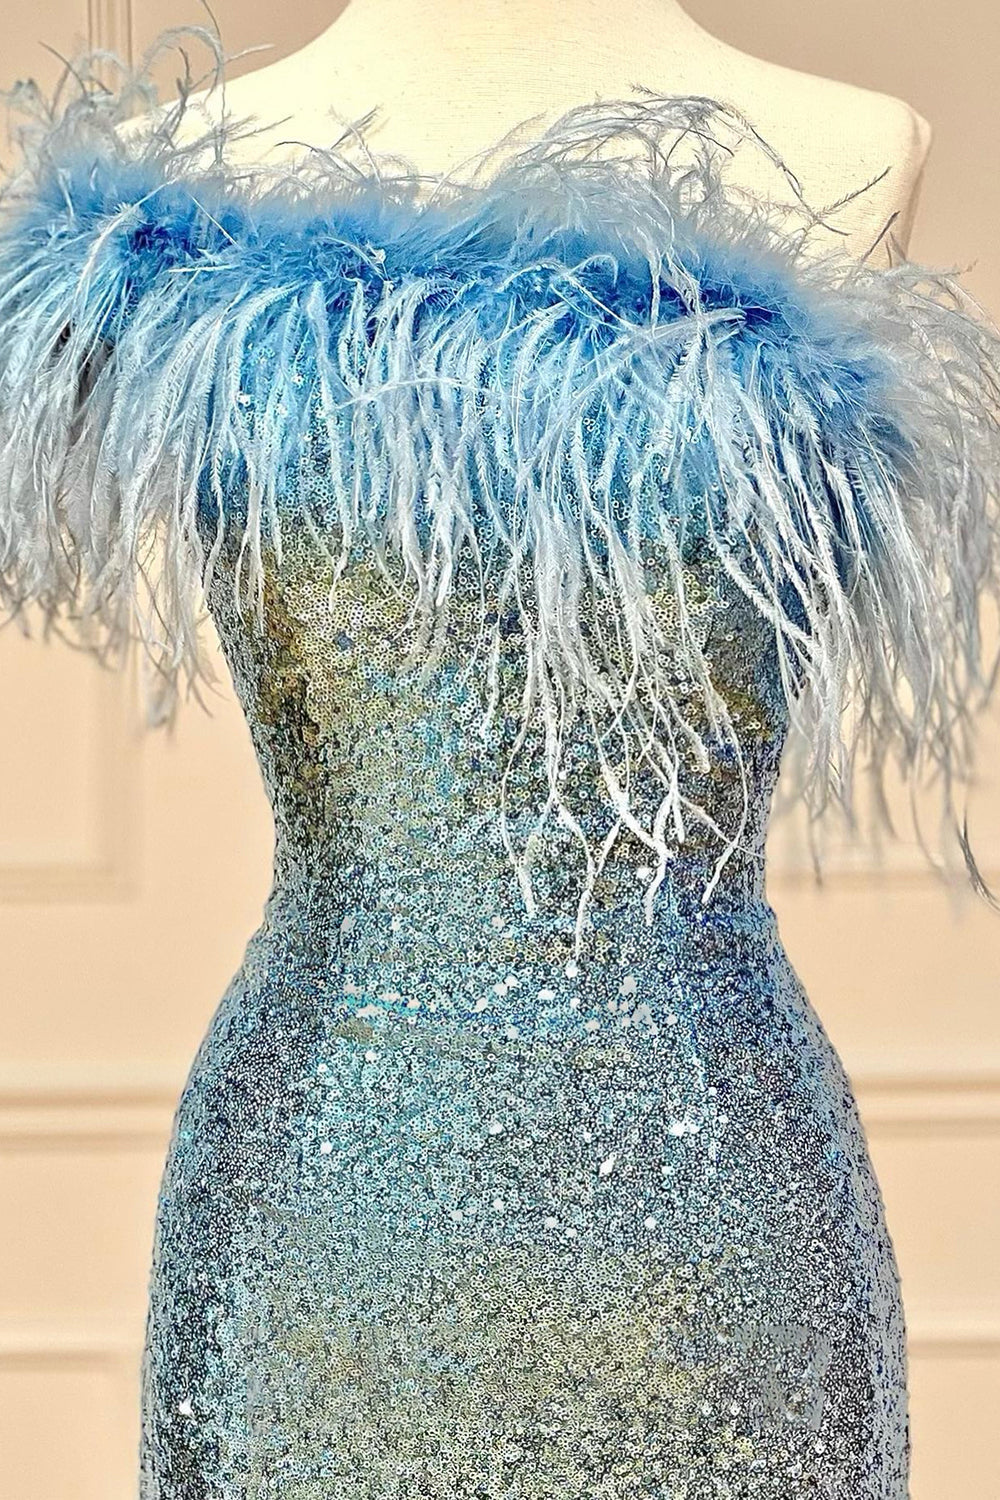 Prom Dresses Brown, Light Blue Sparkly Tight Sequins Homecoming Dress with Feathers